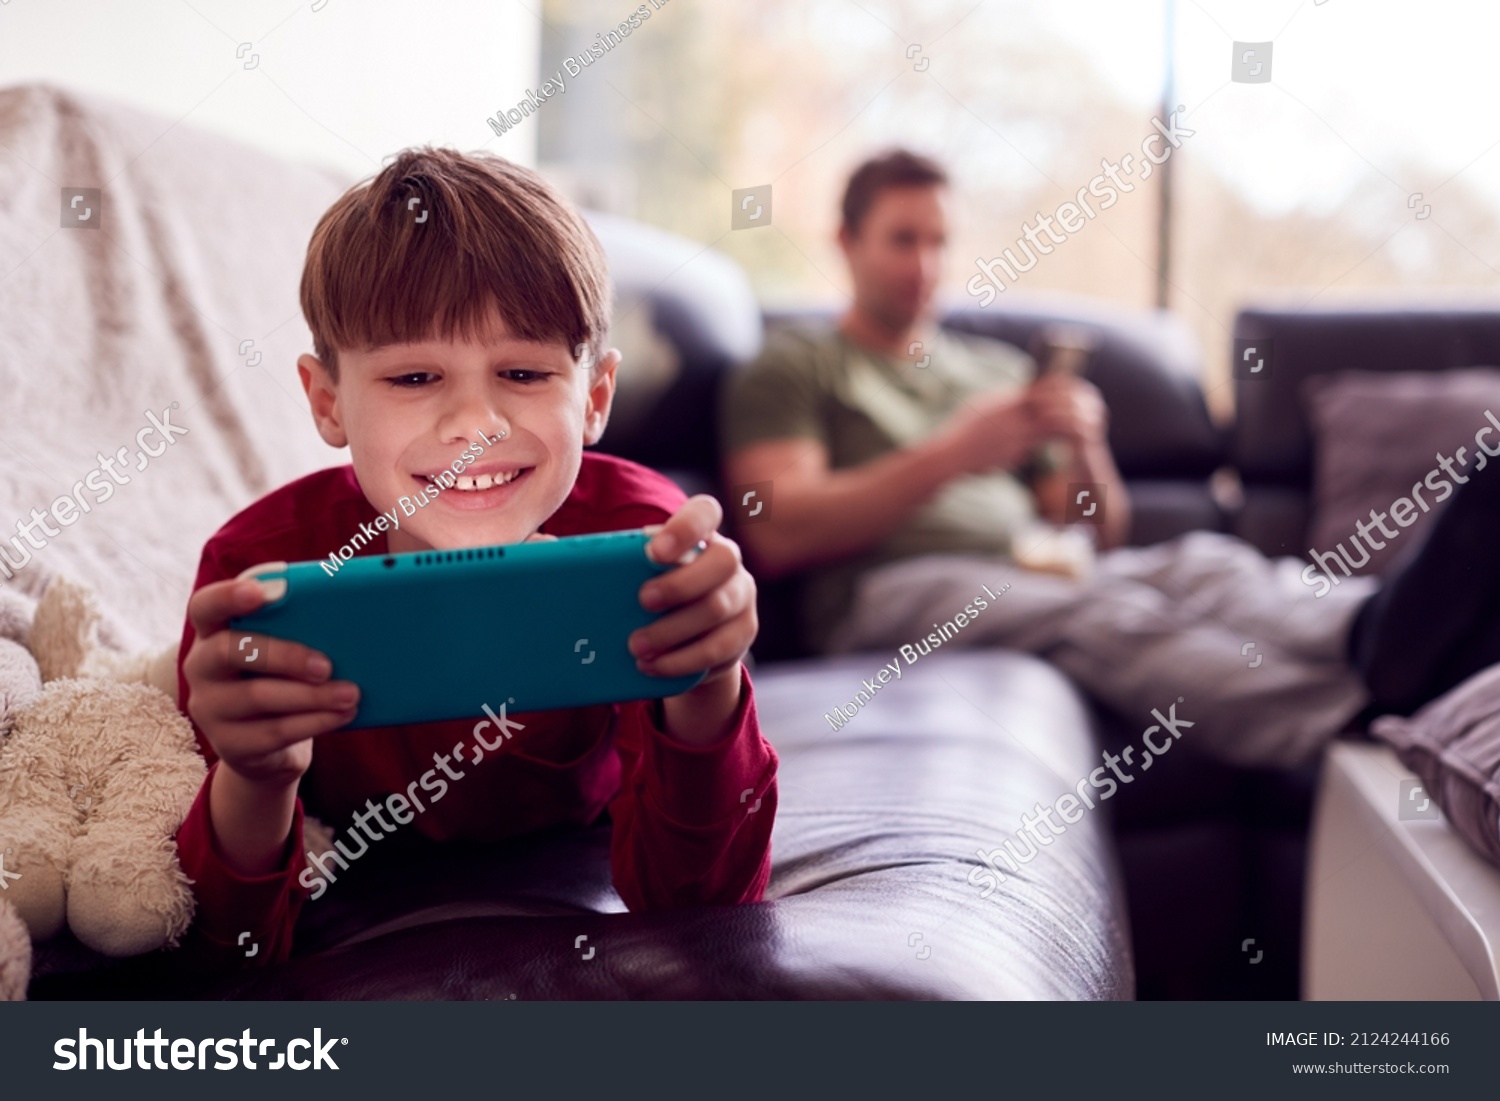 Father Uses Mobile Phone As Son Plays Computer Game On Portable Gaming Device At Home In Pyjamas #2124244166